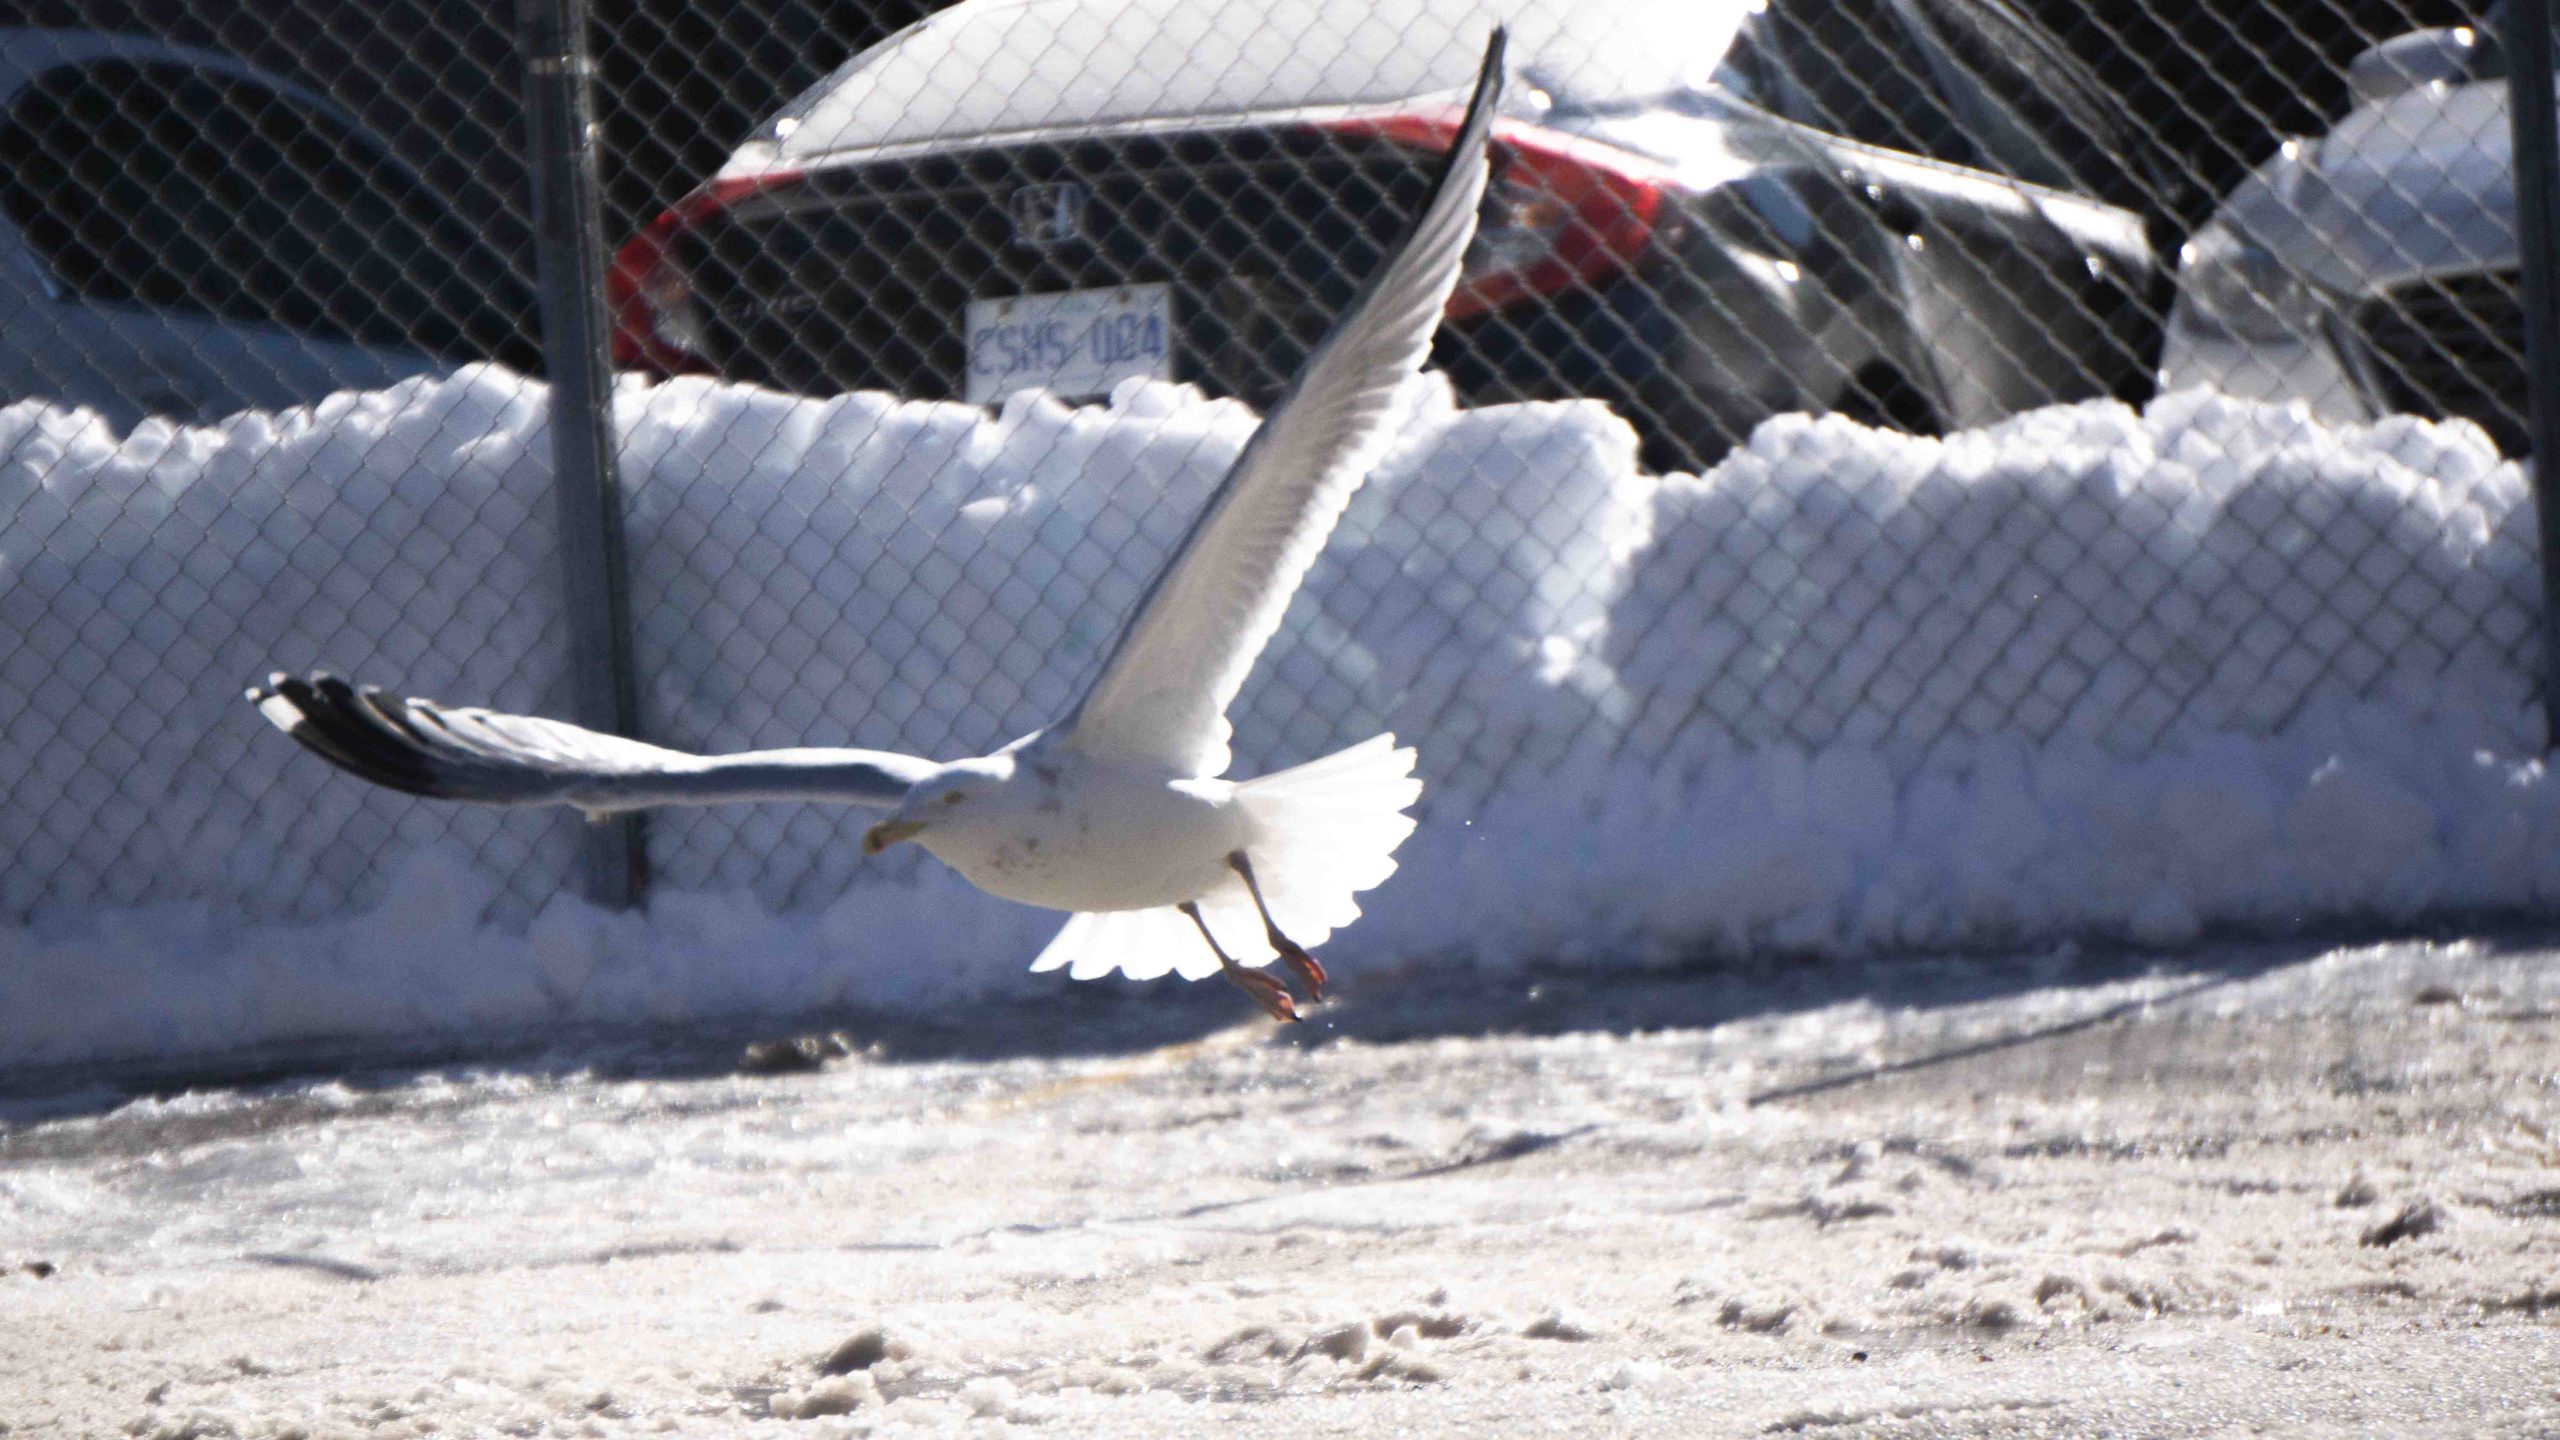 A seagull takes flight from a snowy parking lot.